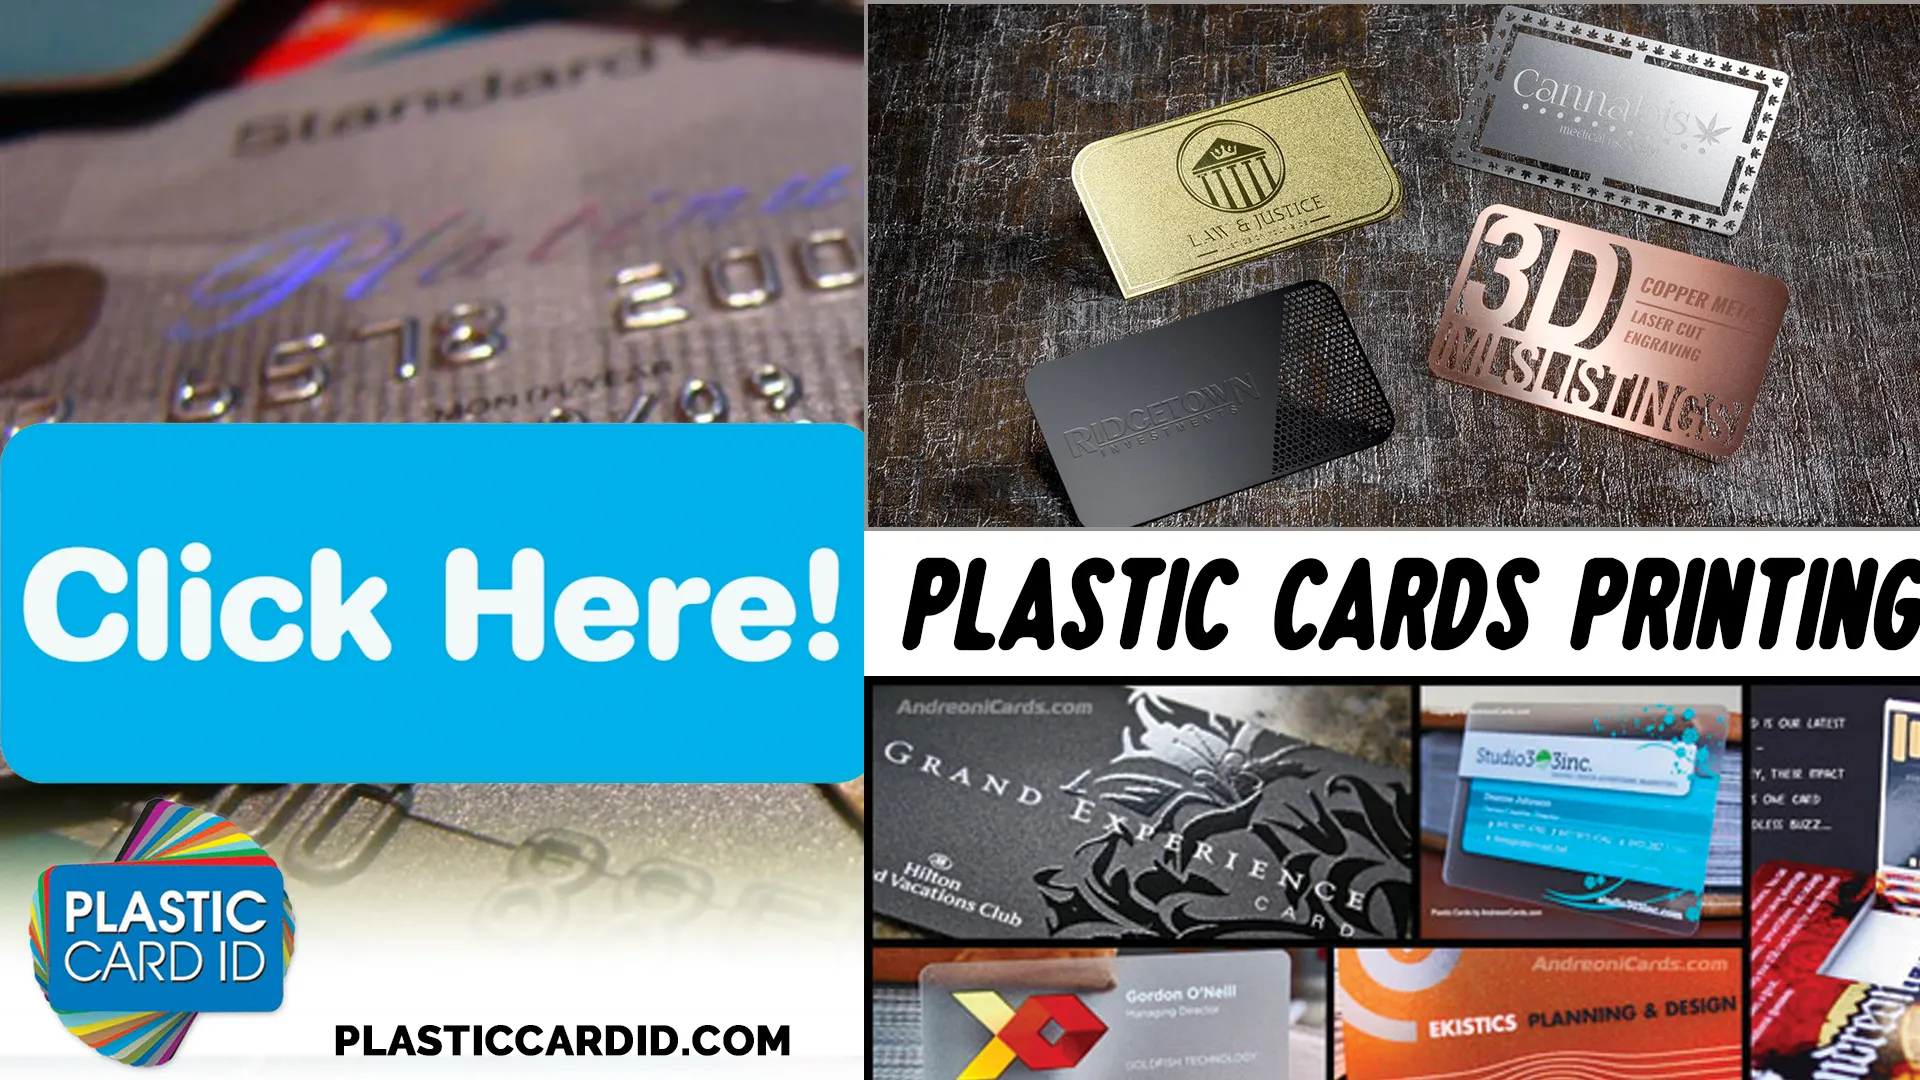 Plastic Card ID
: Fueling Fundraisers Nationwide